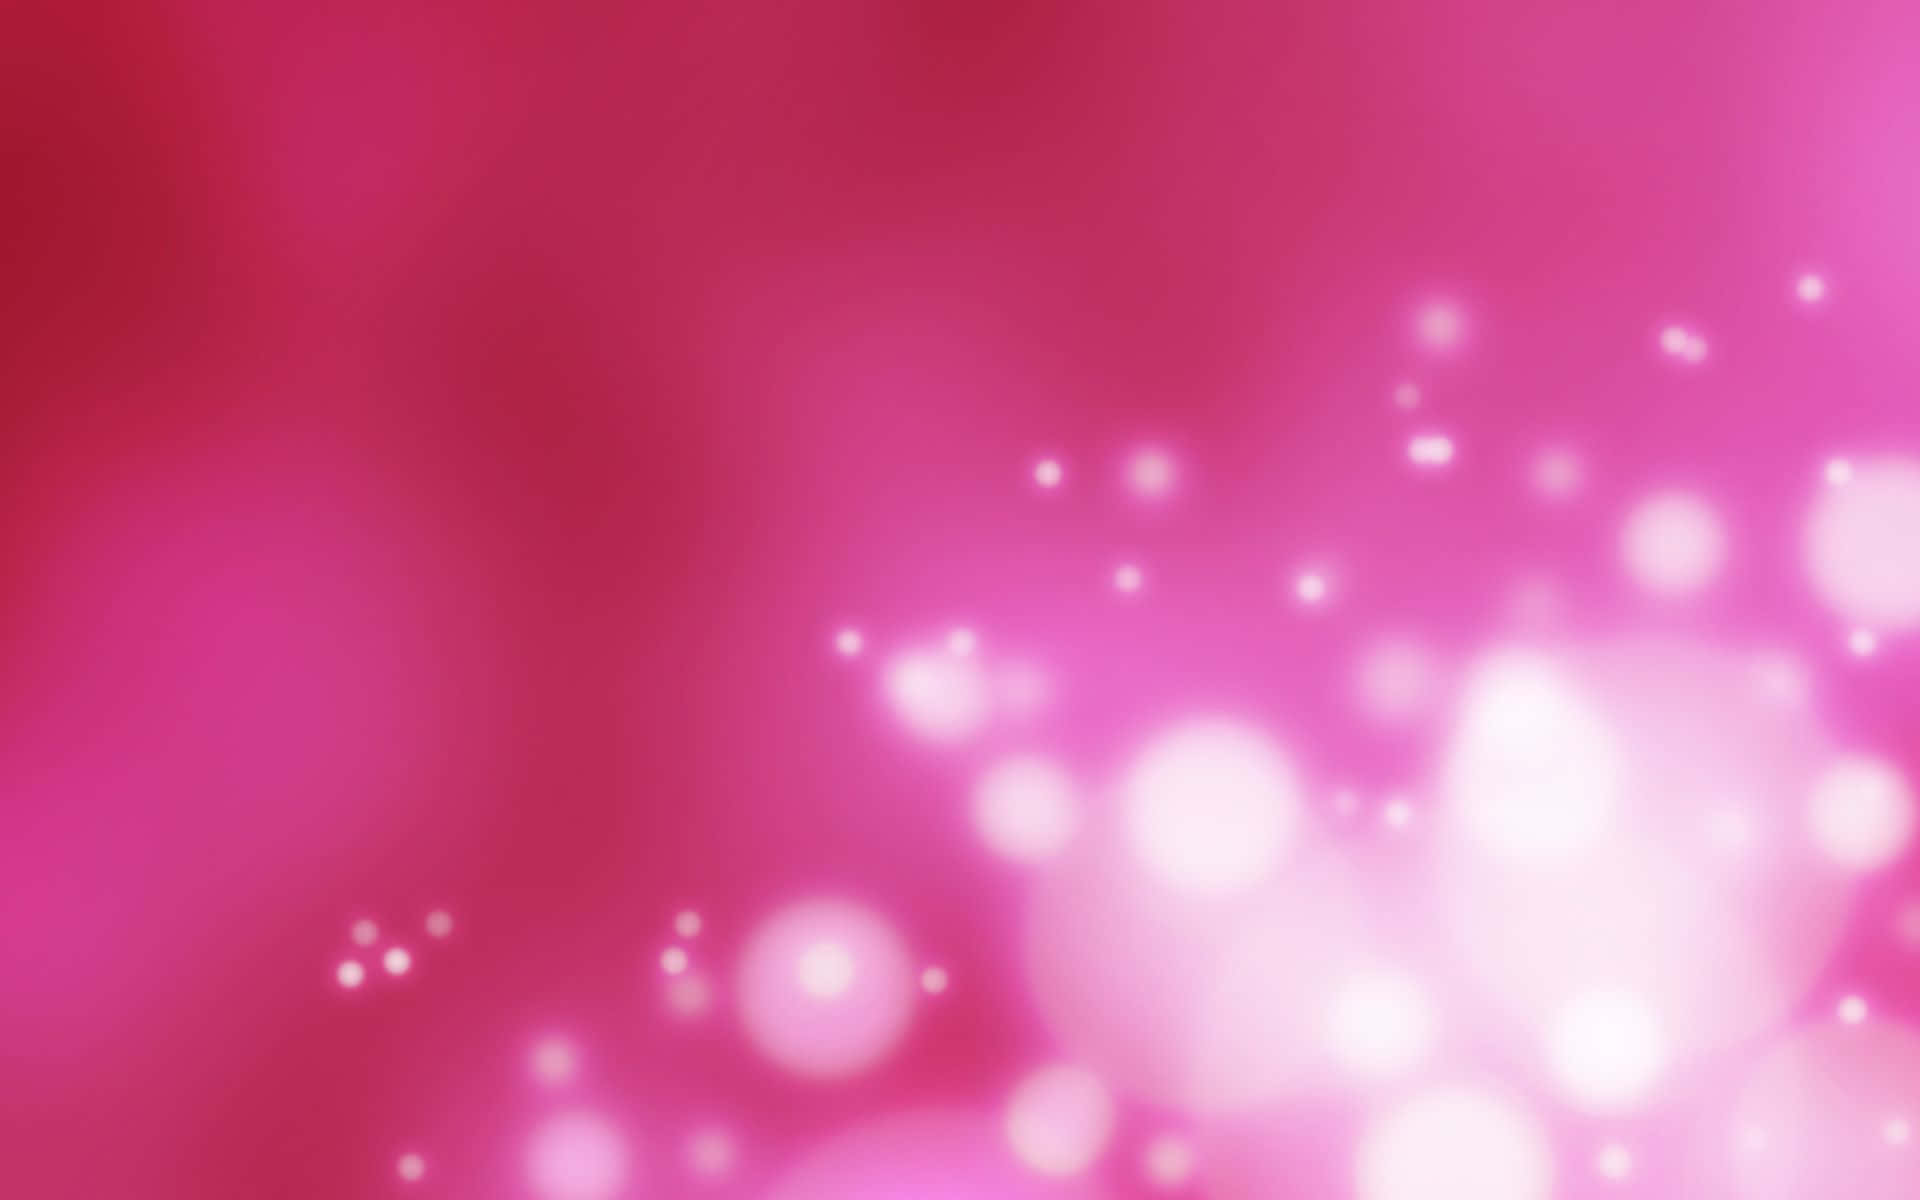 “Colourful Expression: Pink Abstract”